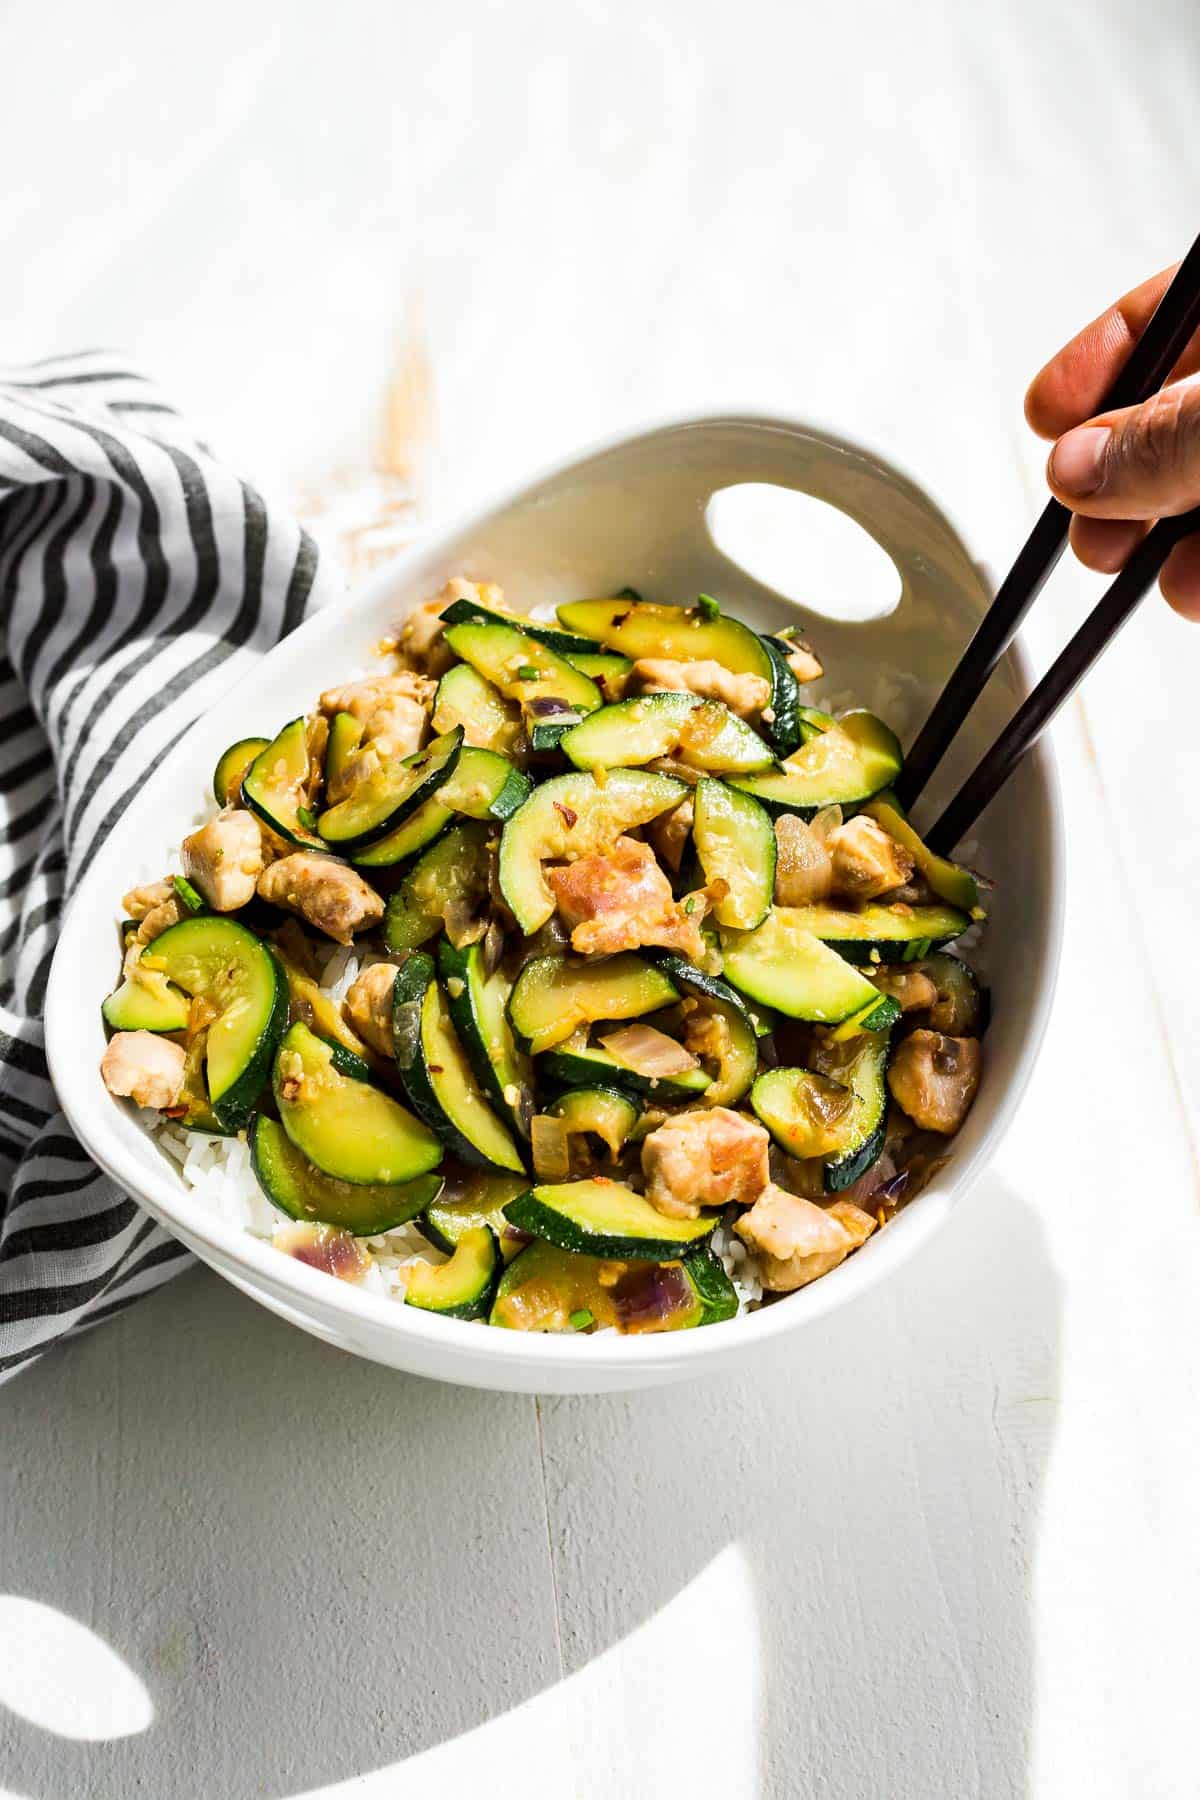 Side view of chicken zucchini stir fry over rice in a white bowl with a hand holding chopsticks scooping some out.